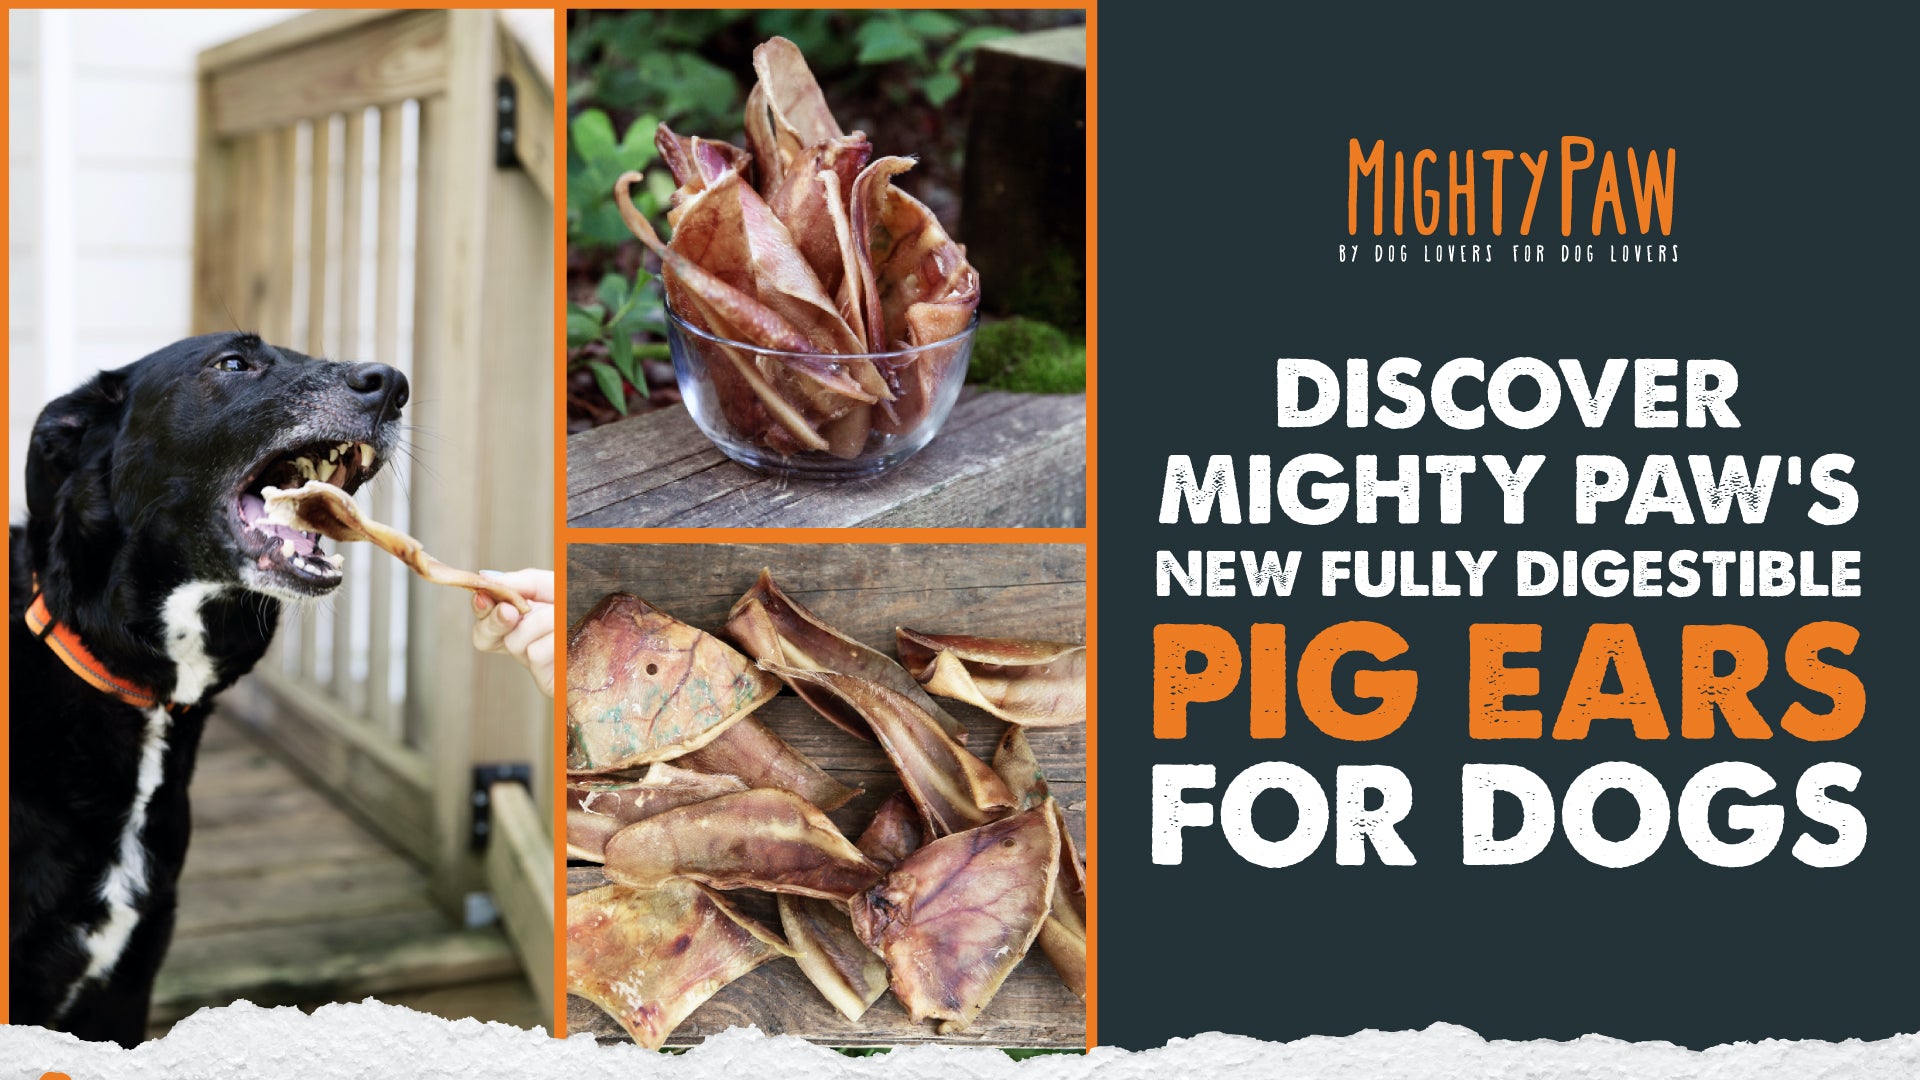 Discover Mighty Paw's New Fully Digestible Pig Ears For Dogs